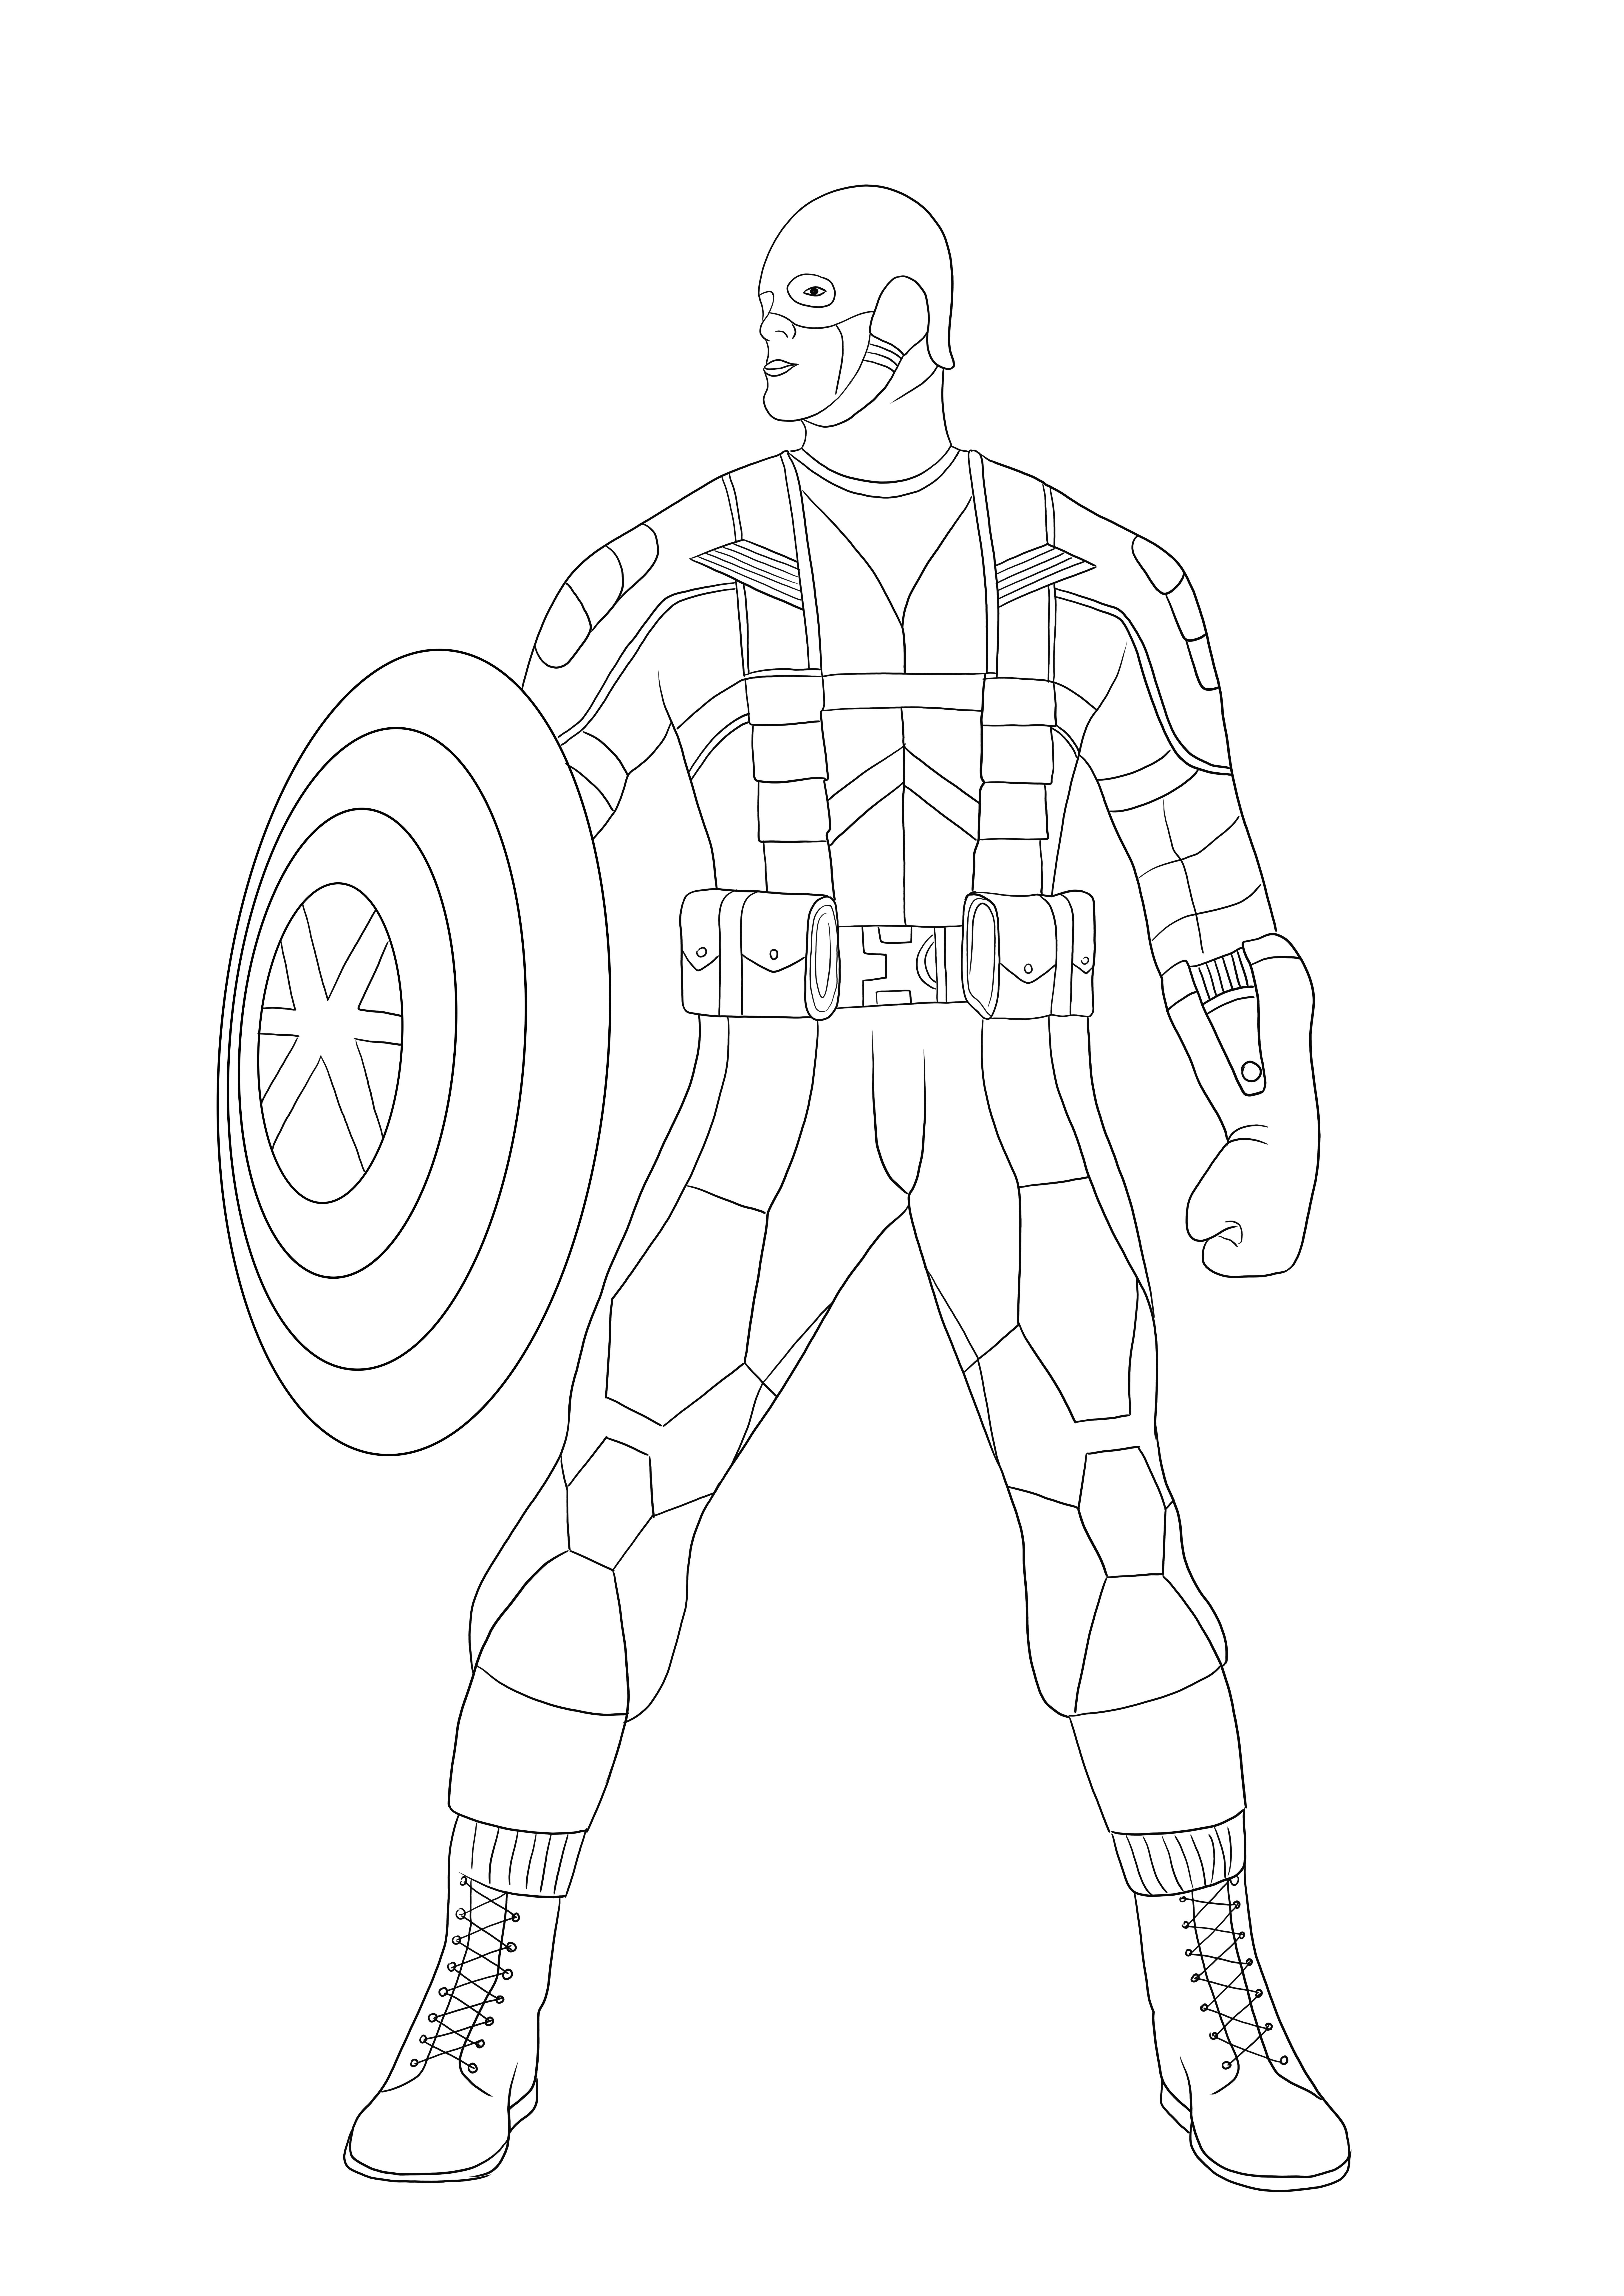 Captain America ready to fight free downloadable image easy to color